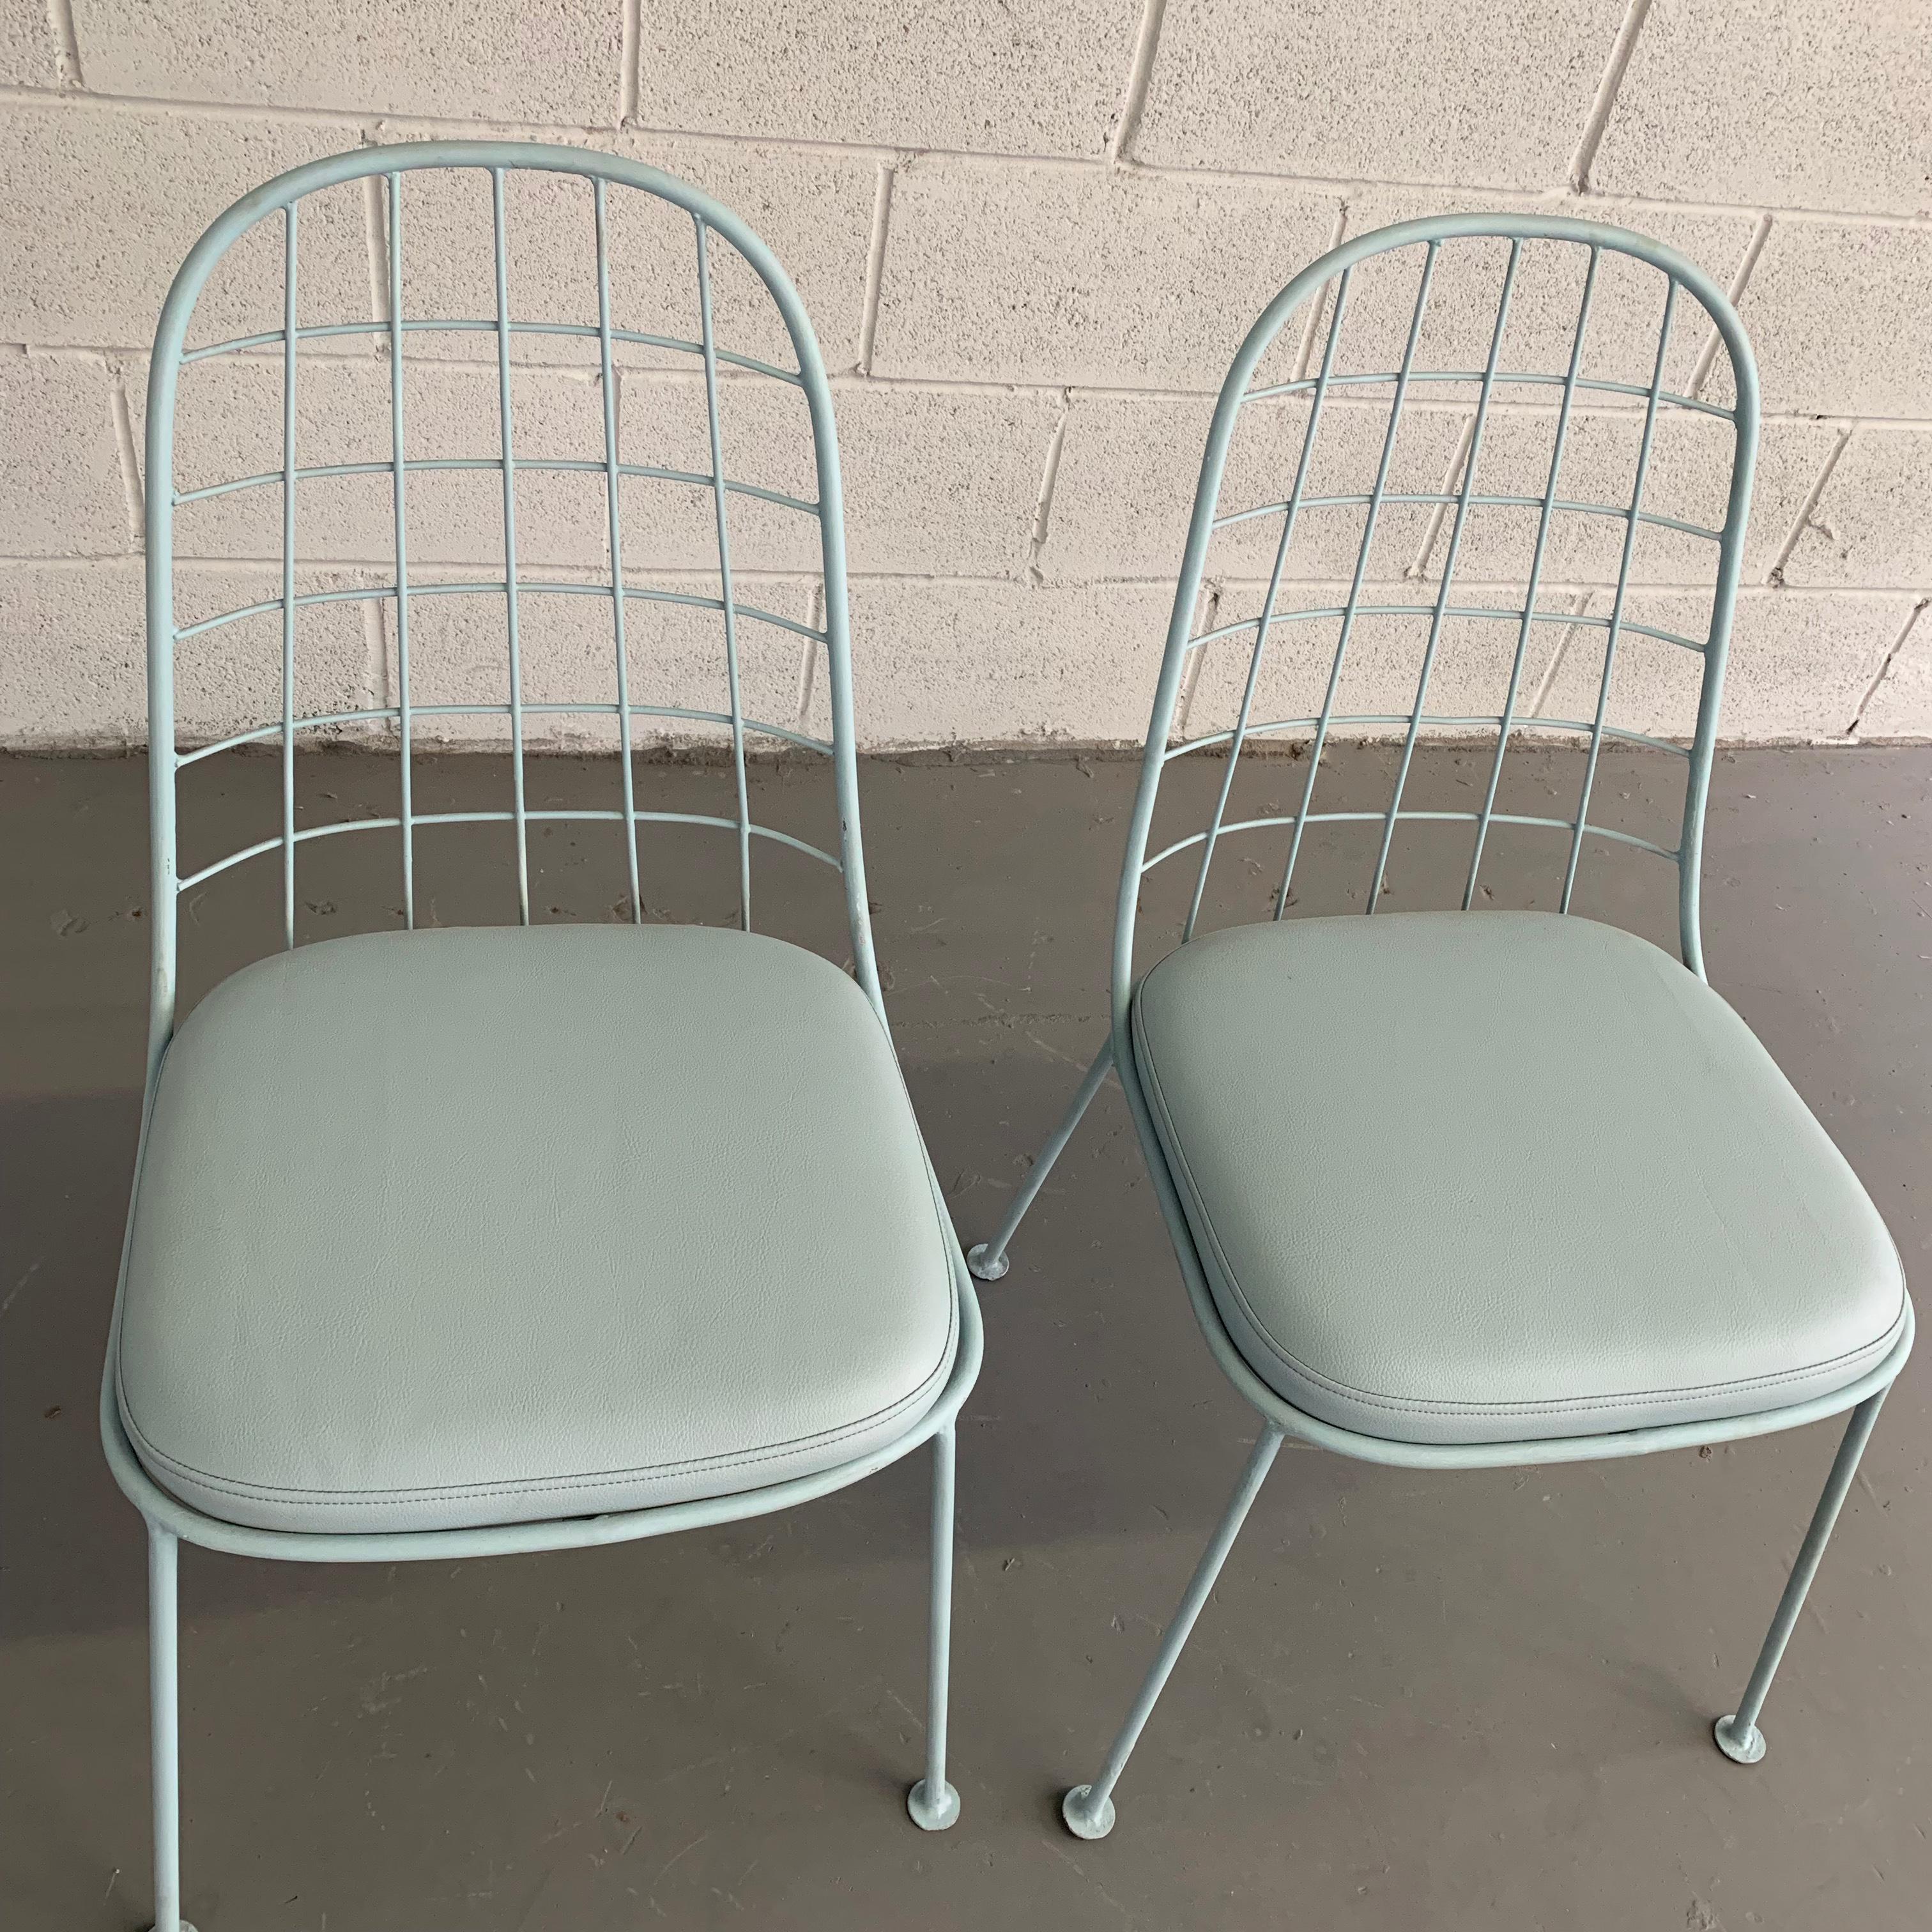 Pair of Mid-Century Modern Painted Wrought Iron Outdoor Patio Chairs For Sale 1